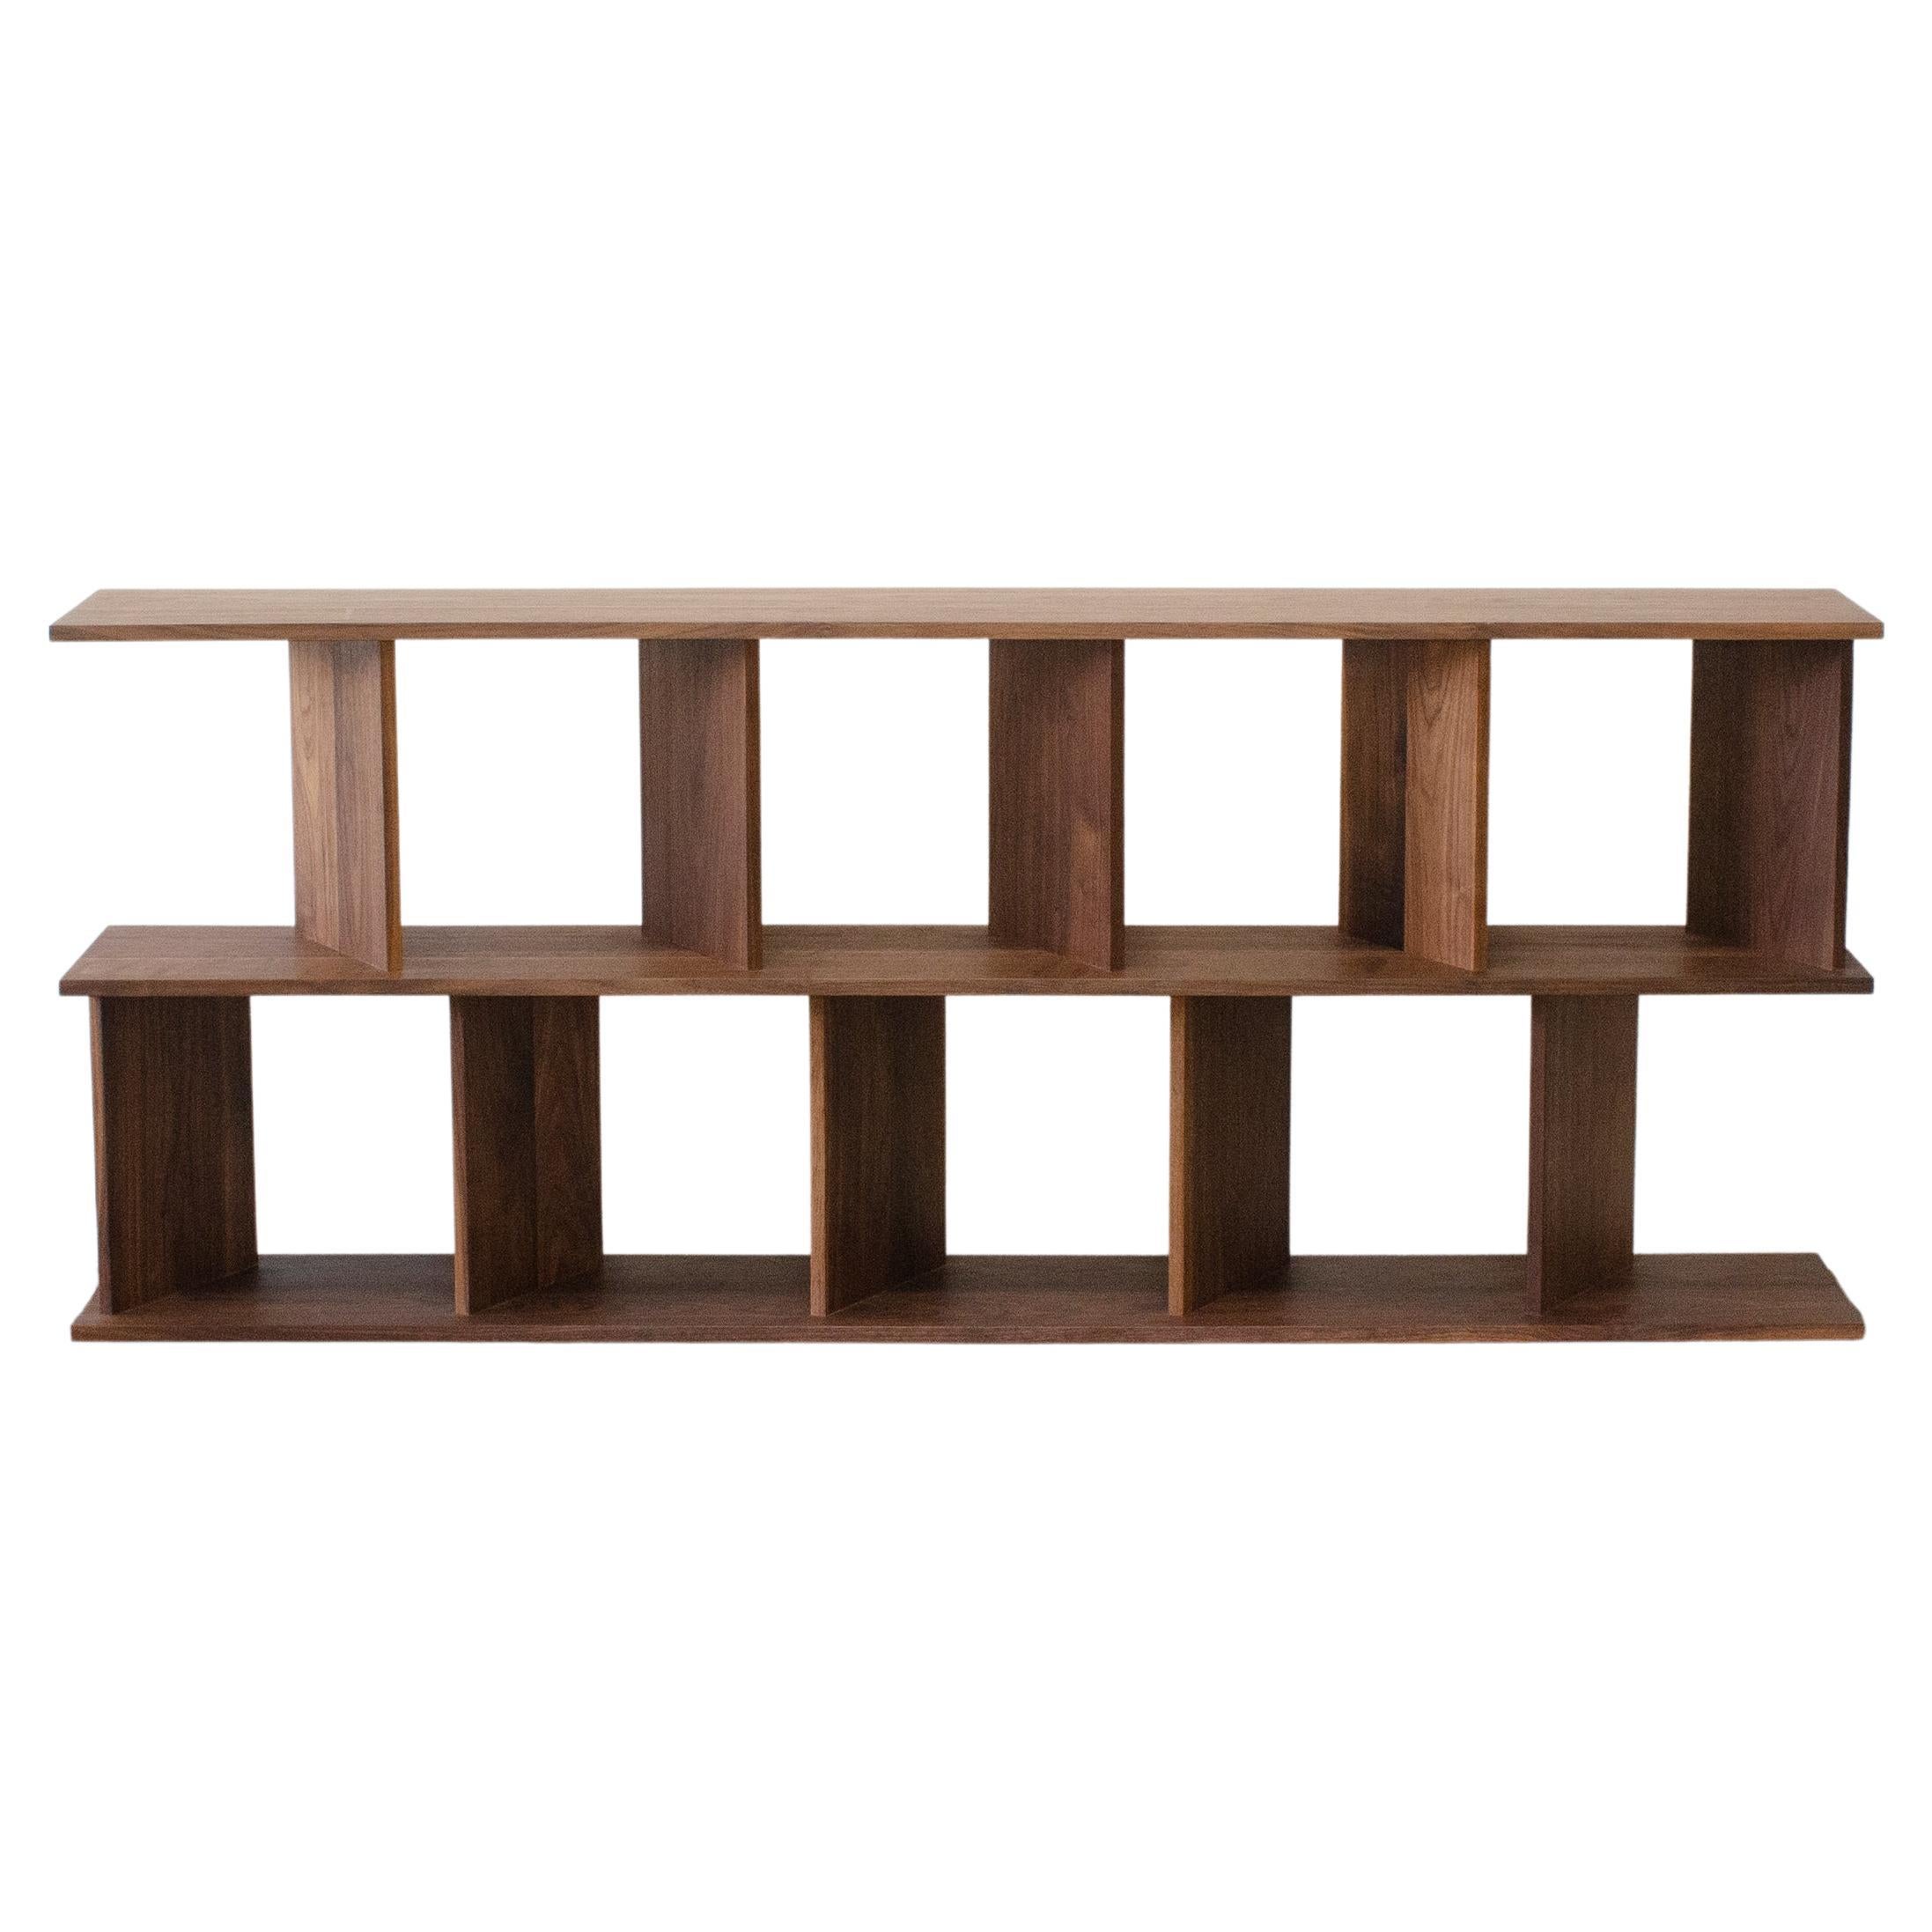 Contemporary Shelving Room Divider "30/30 S" in Walnut by Casey Lurie Studio